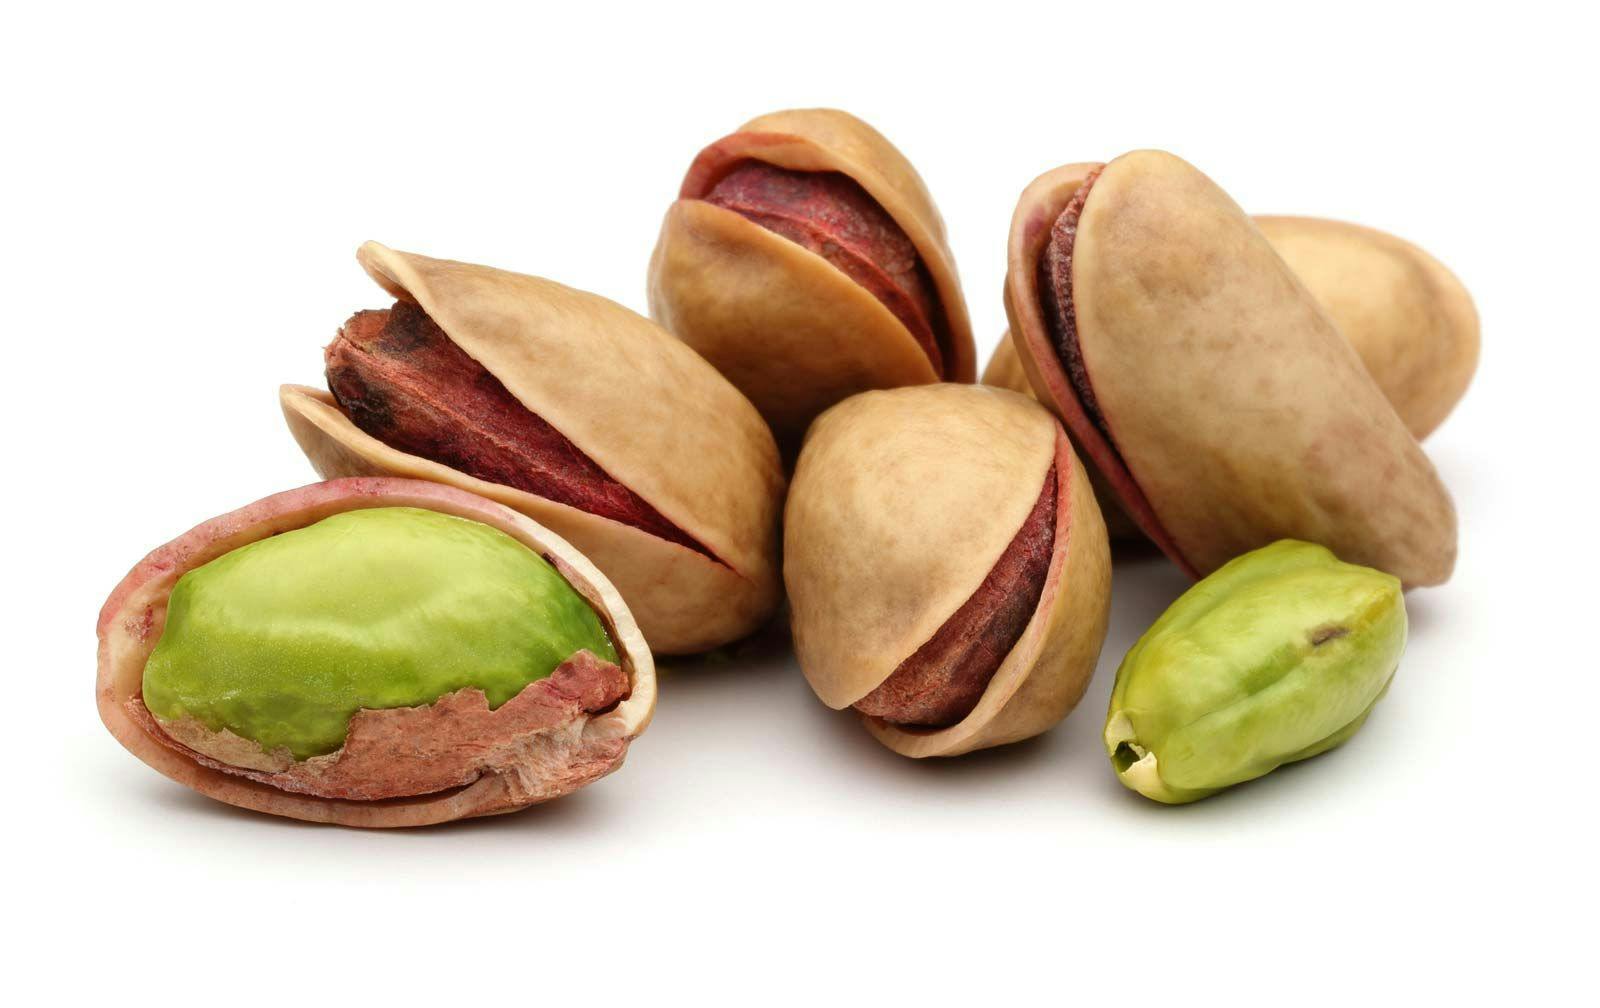 nuts (I used pistachios)